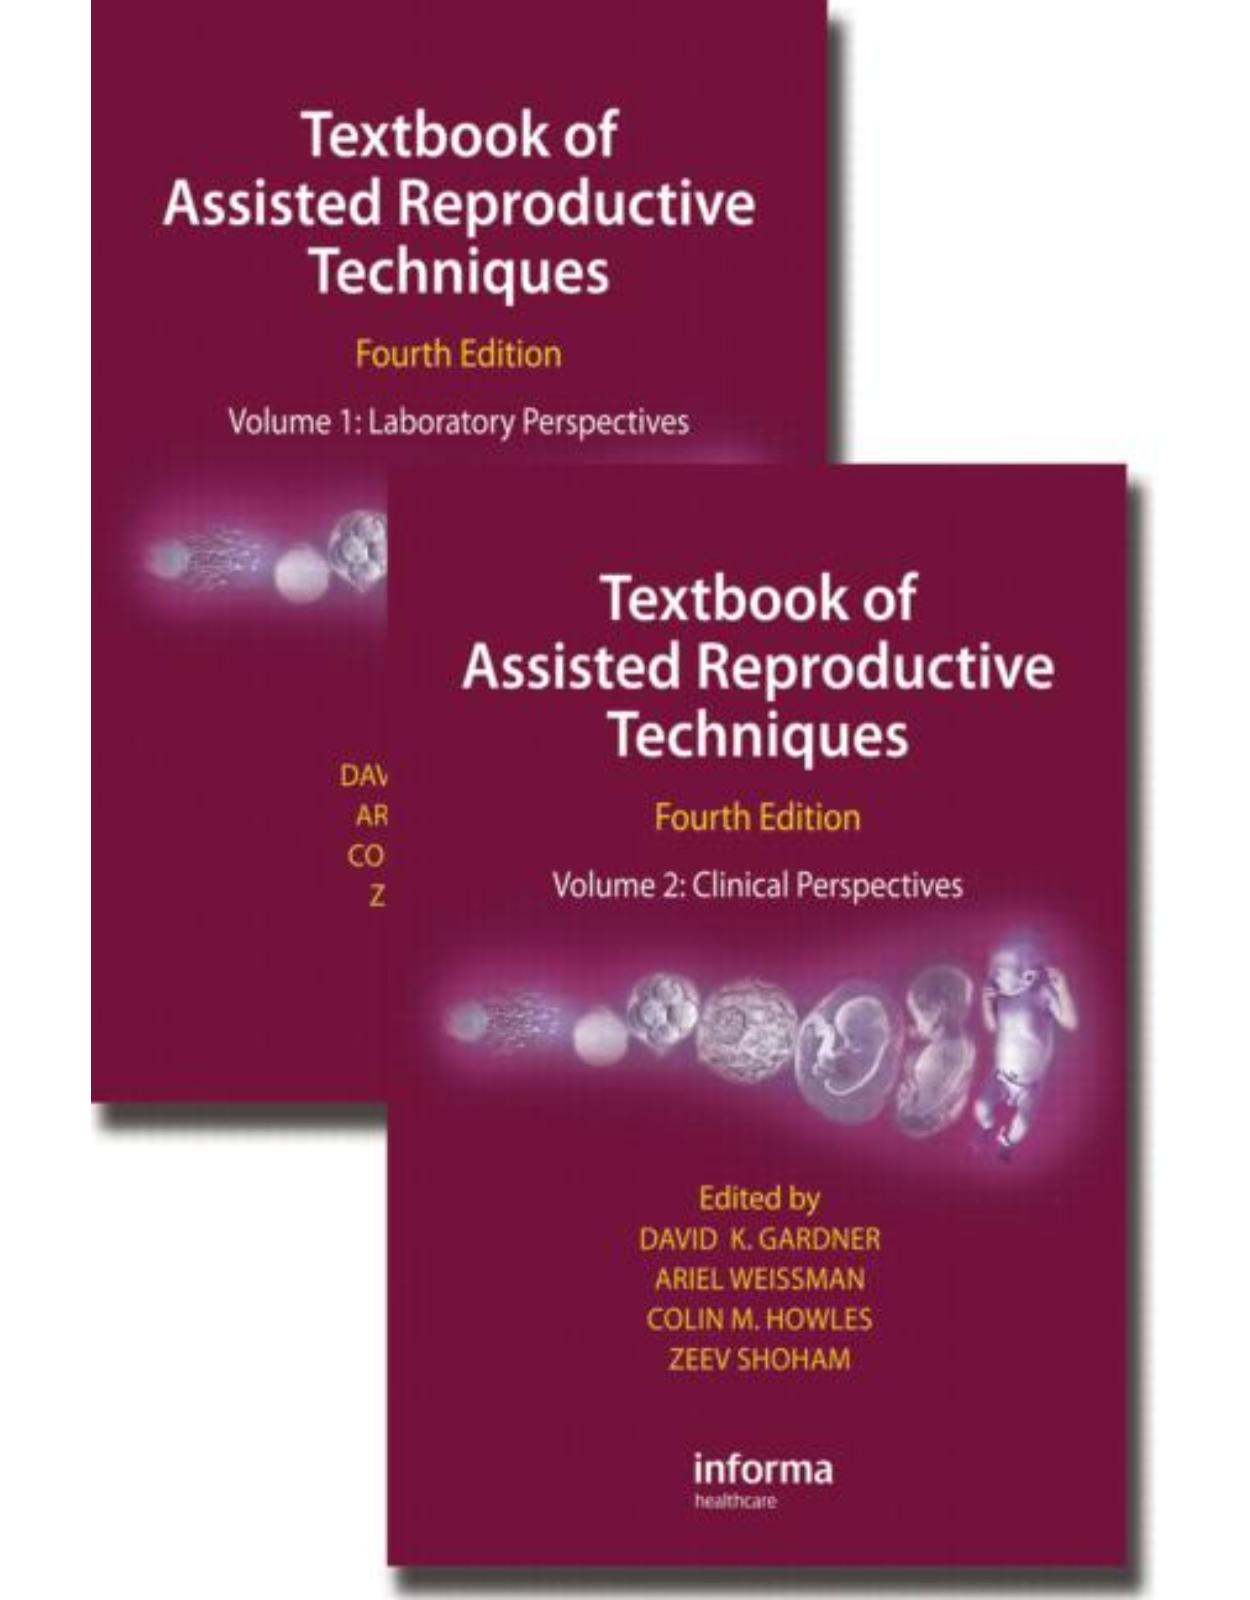  Textbook of Assisted Reproductive Techniques, Fourth Edition (Two Volume Set)